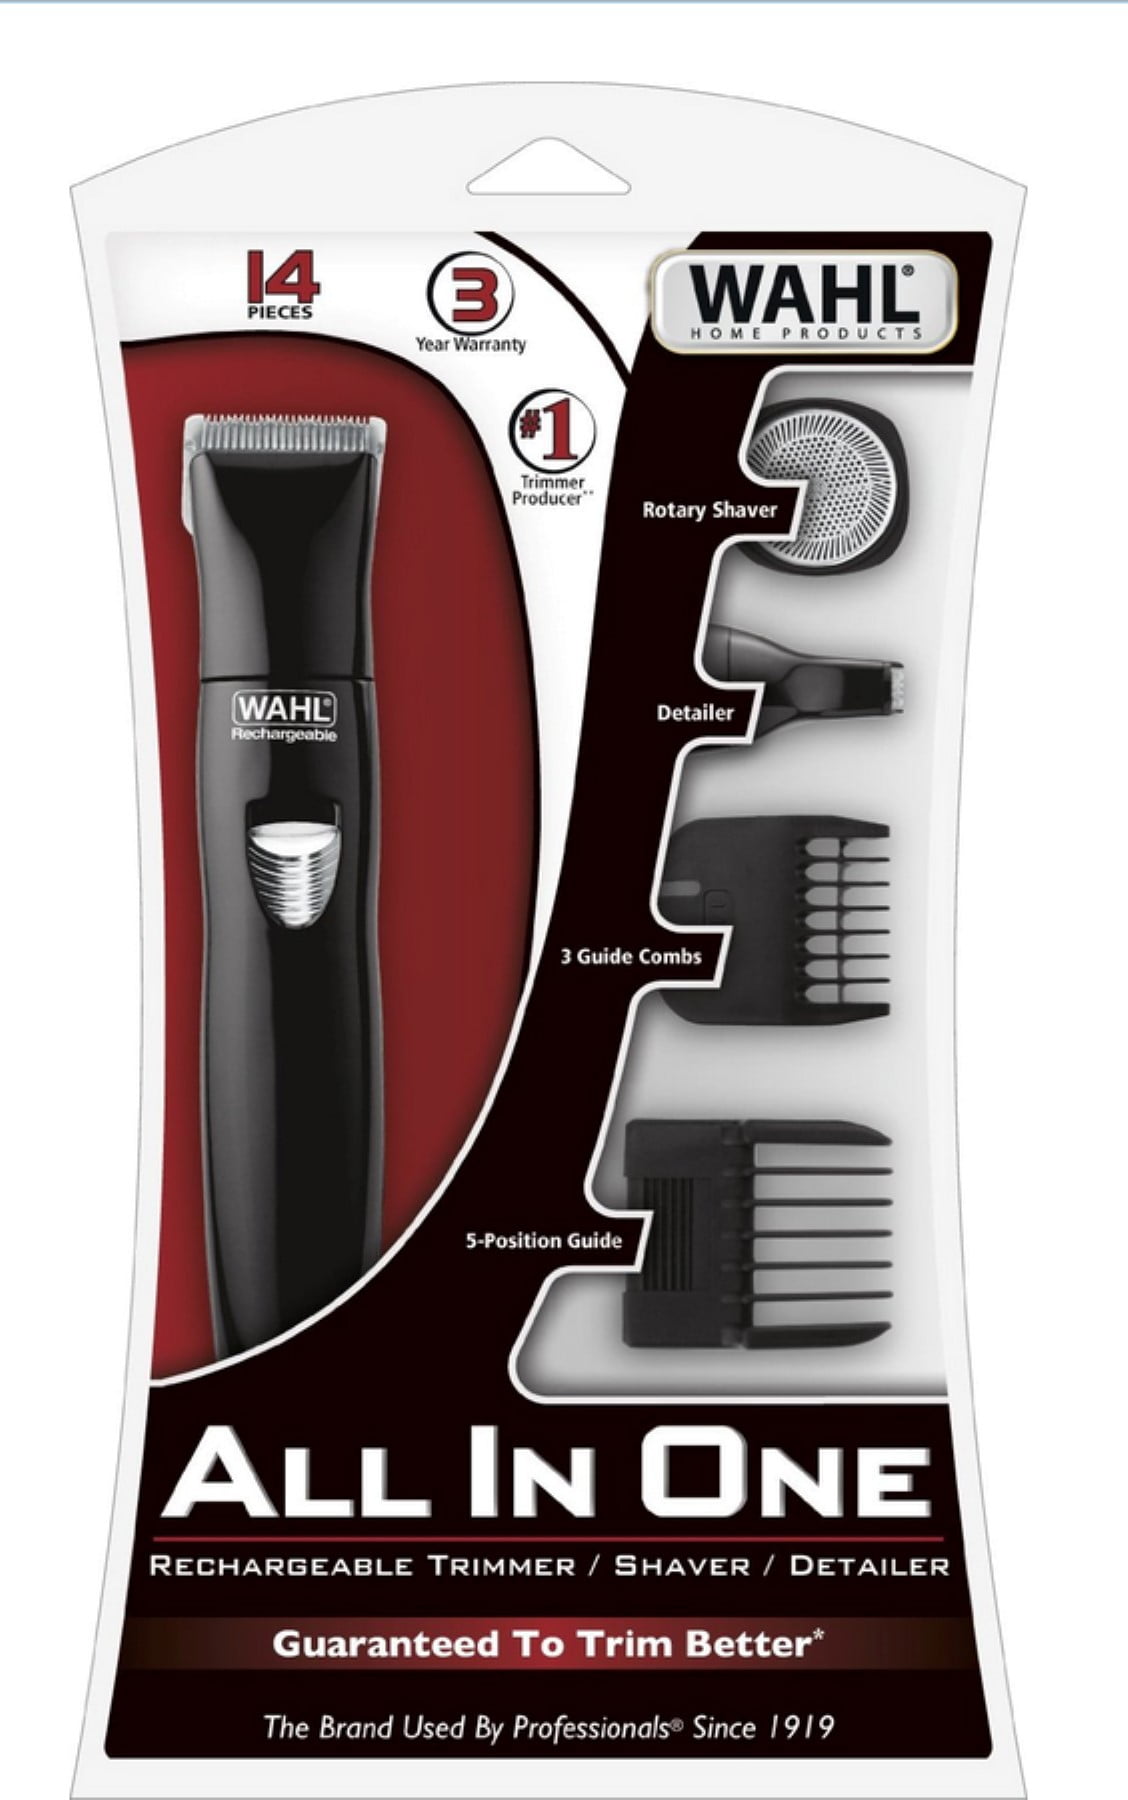 wahl sport style clippers